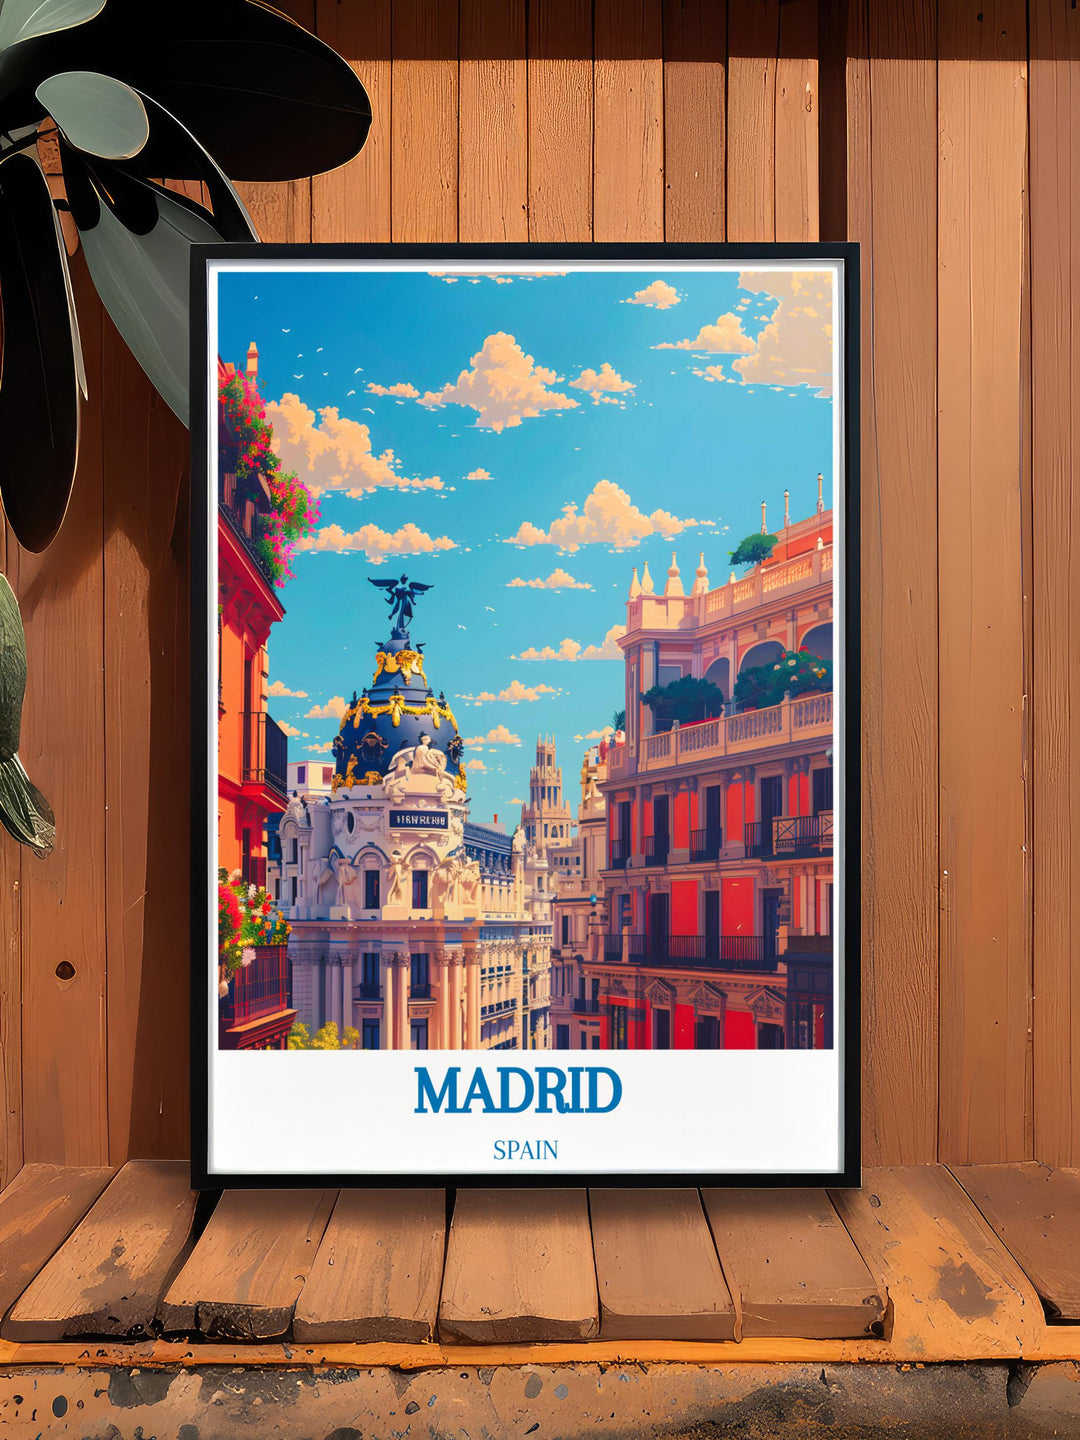 Madrid vintage travel poster, ideal for collectors and fans of retro style.